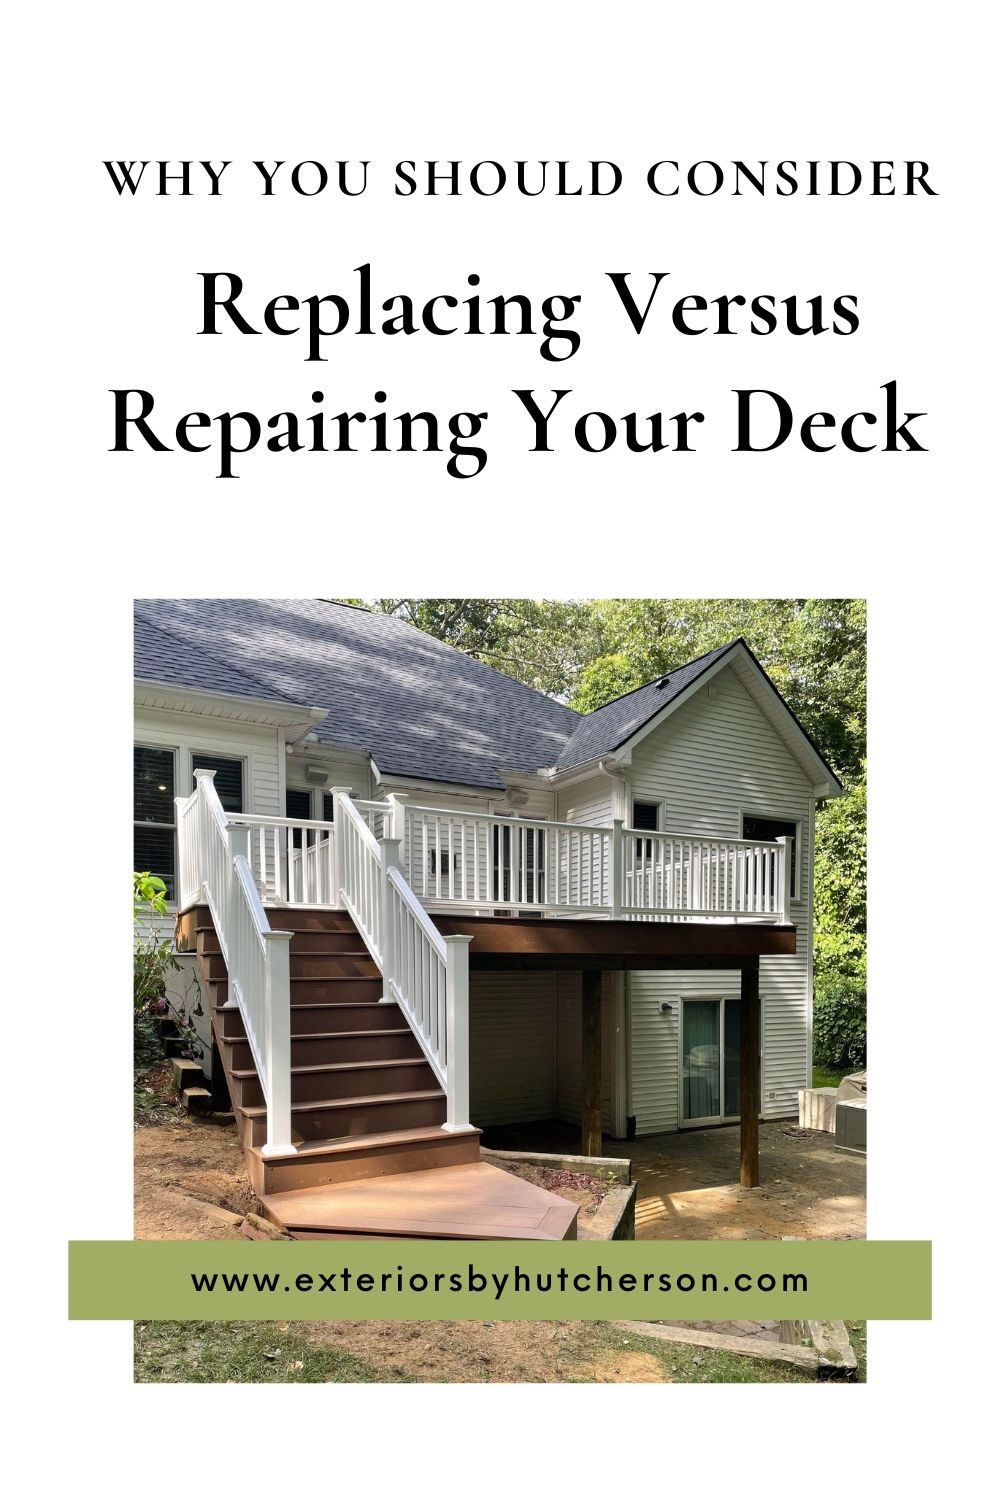 Why You Should Consider Replacing Versus Repairing Your Deck